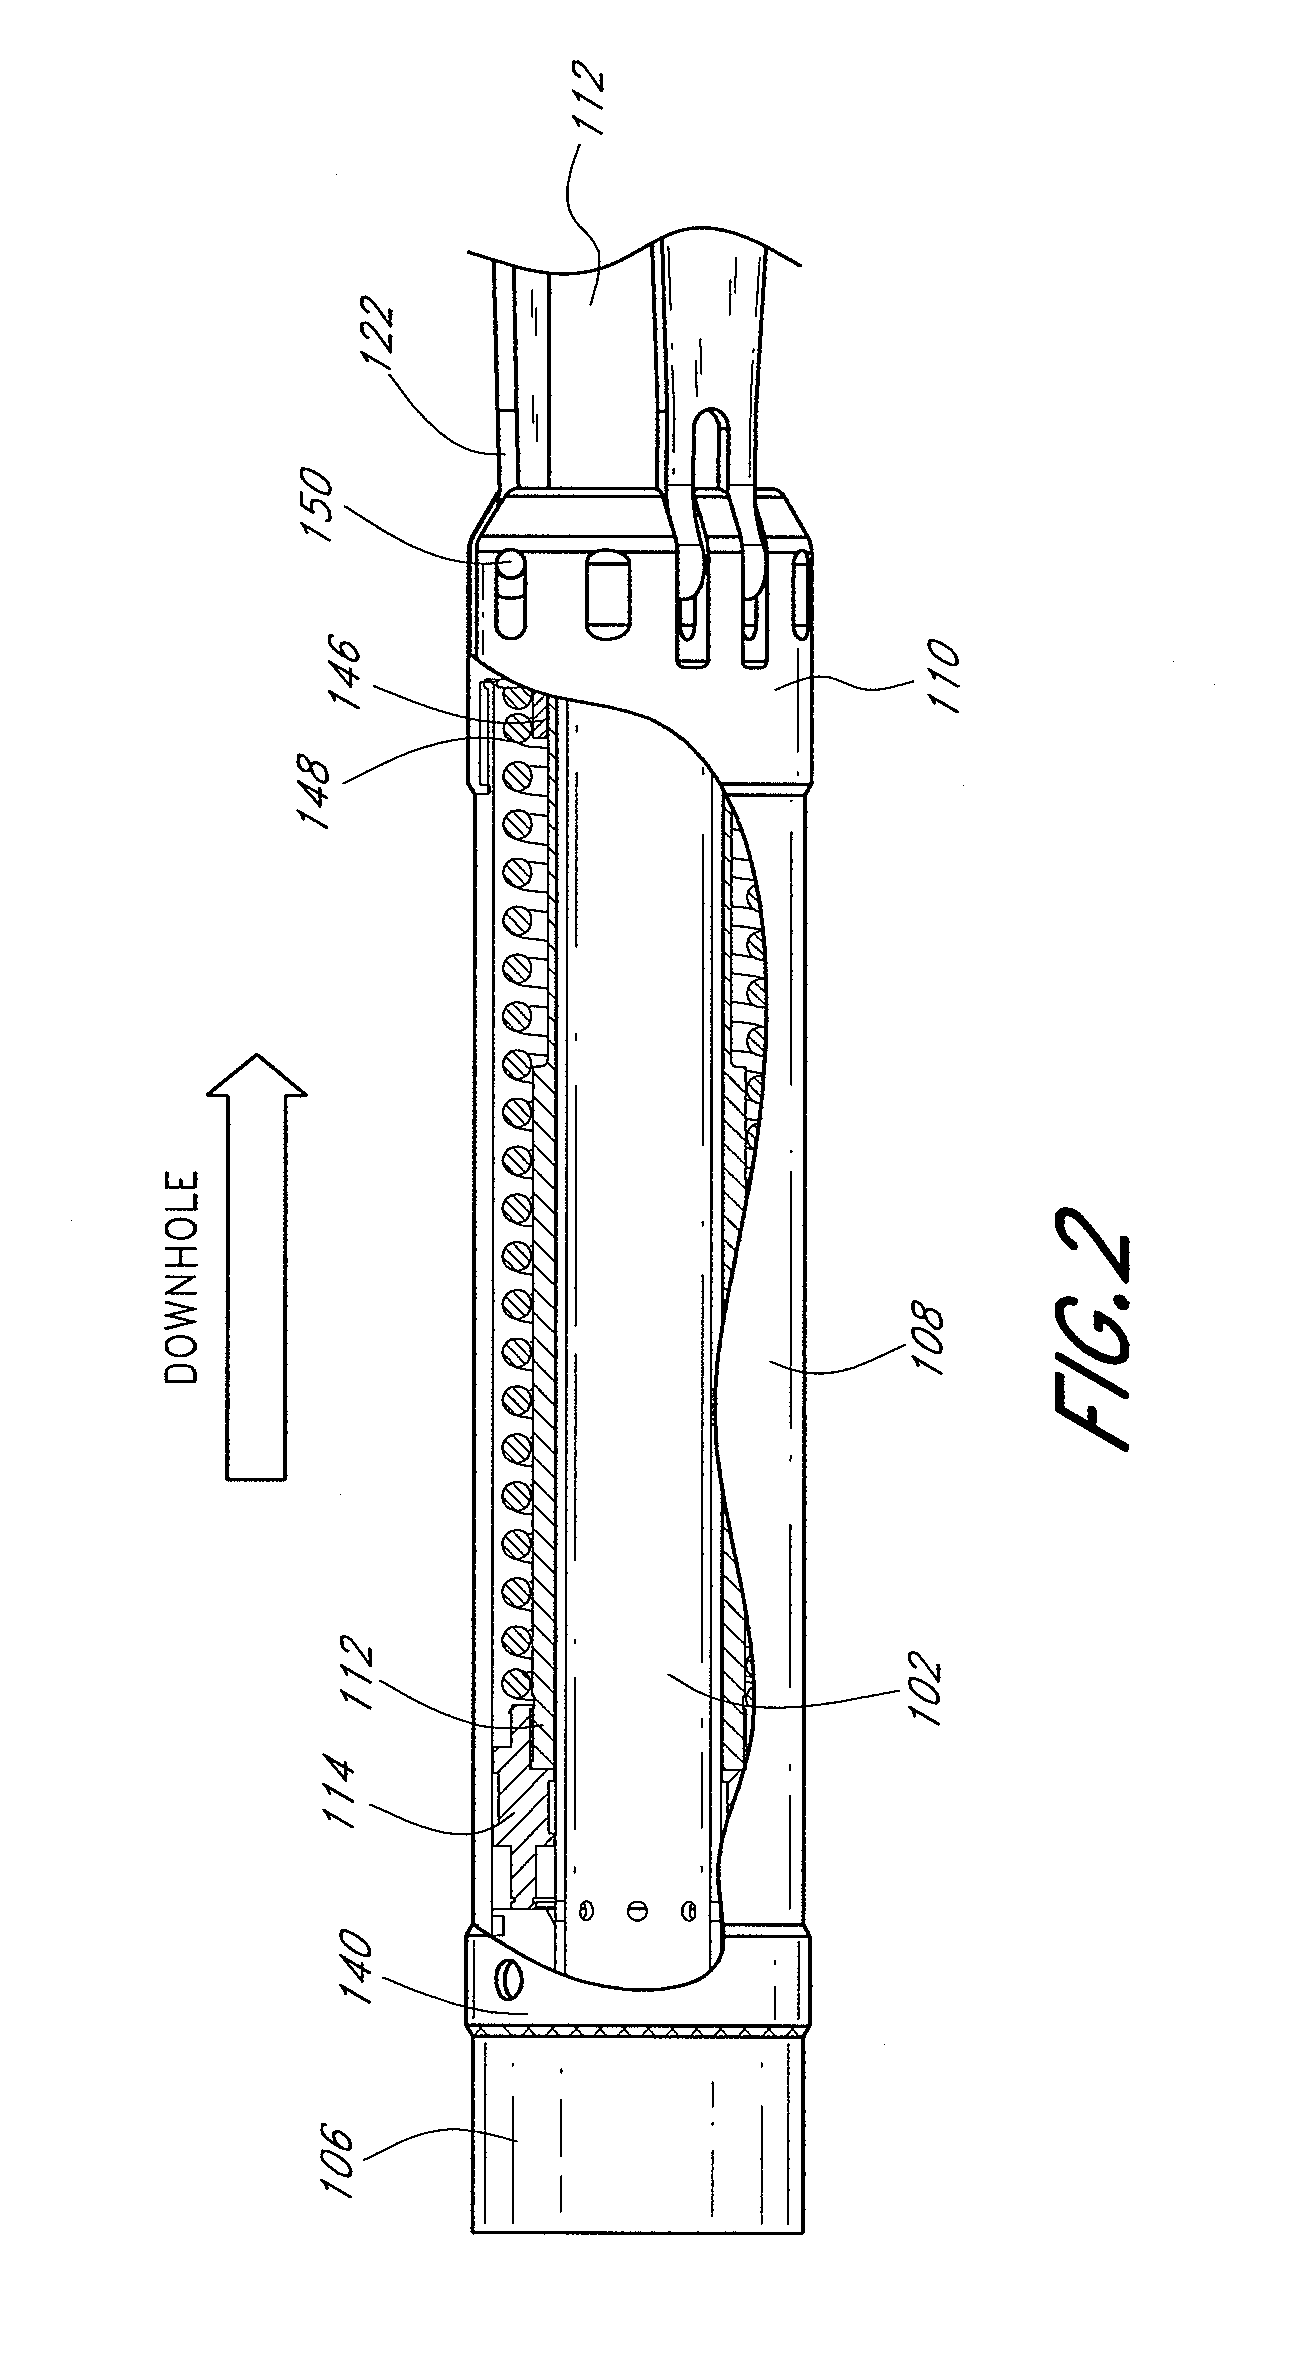 Methods and apparatuses for inhibiting rotational misalignment of assemblies in expandable well tools